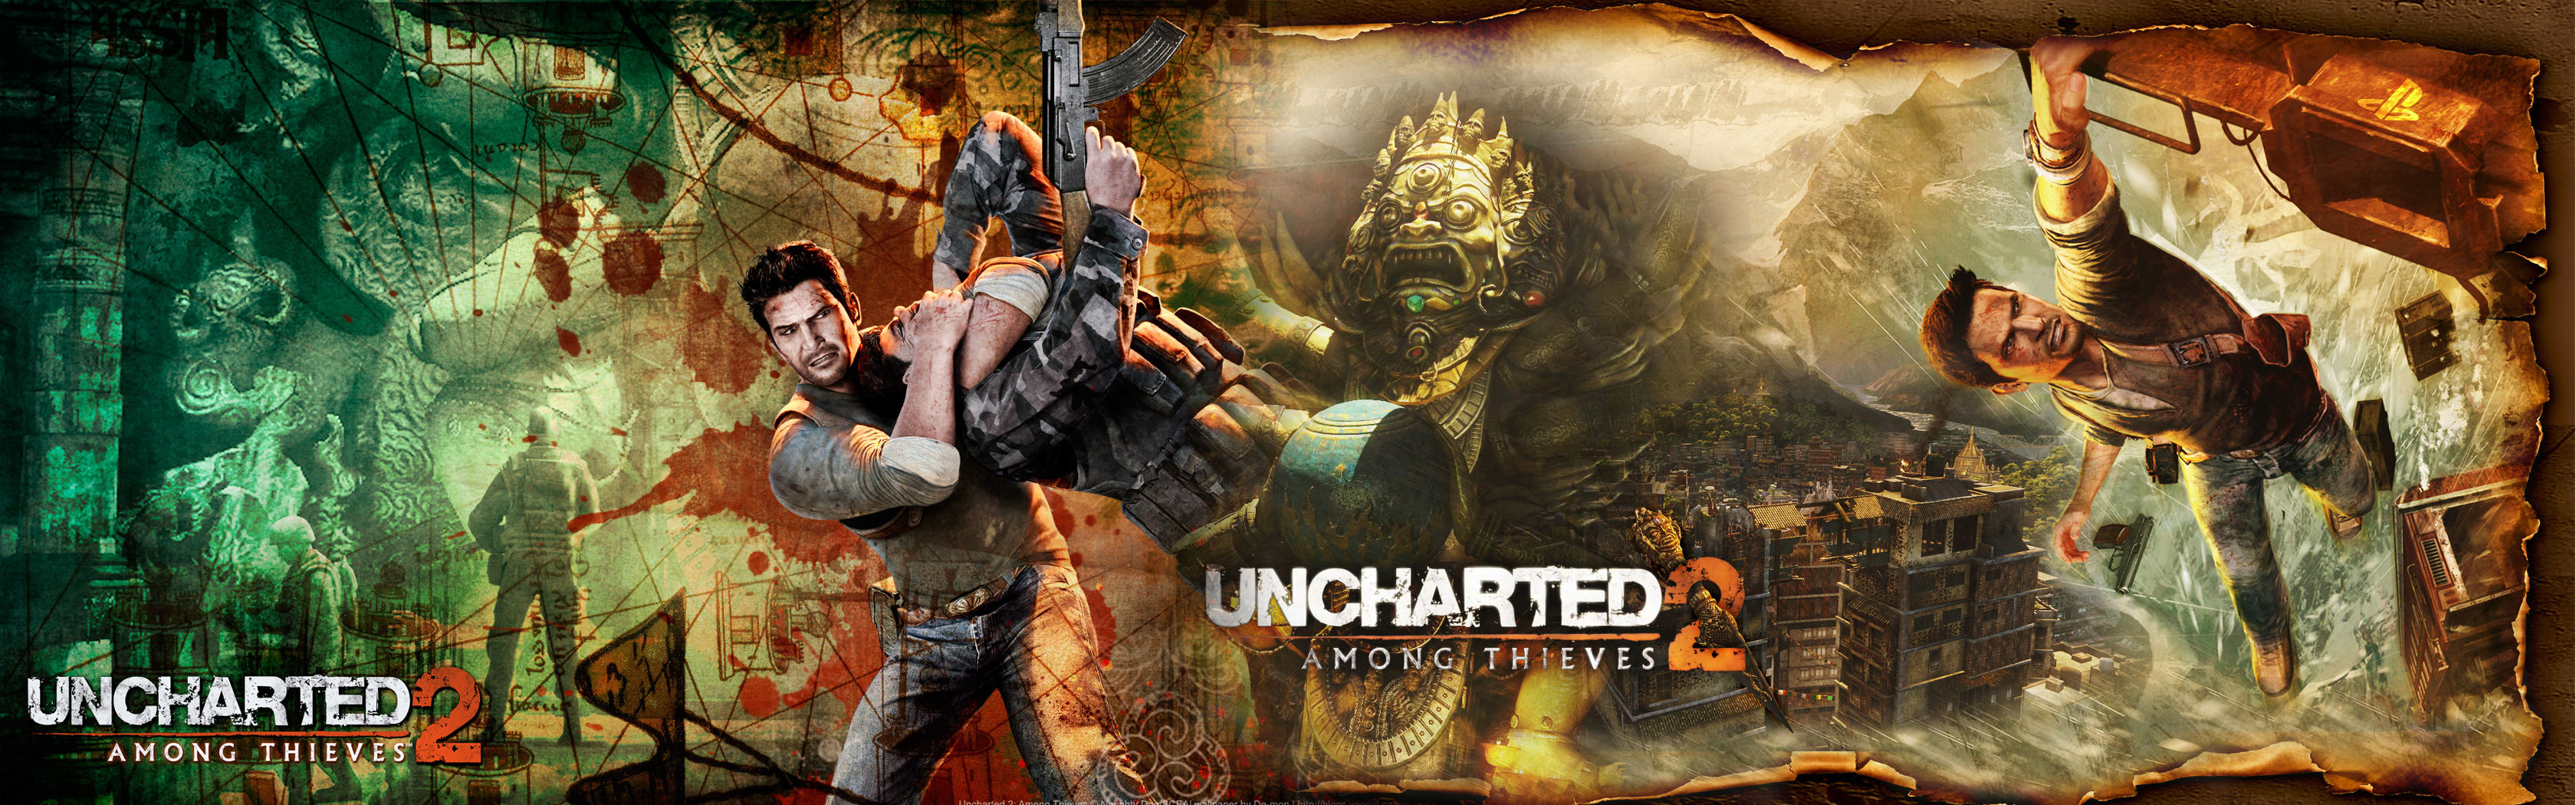 uncharted 2 game download